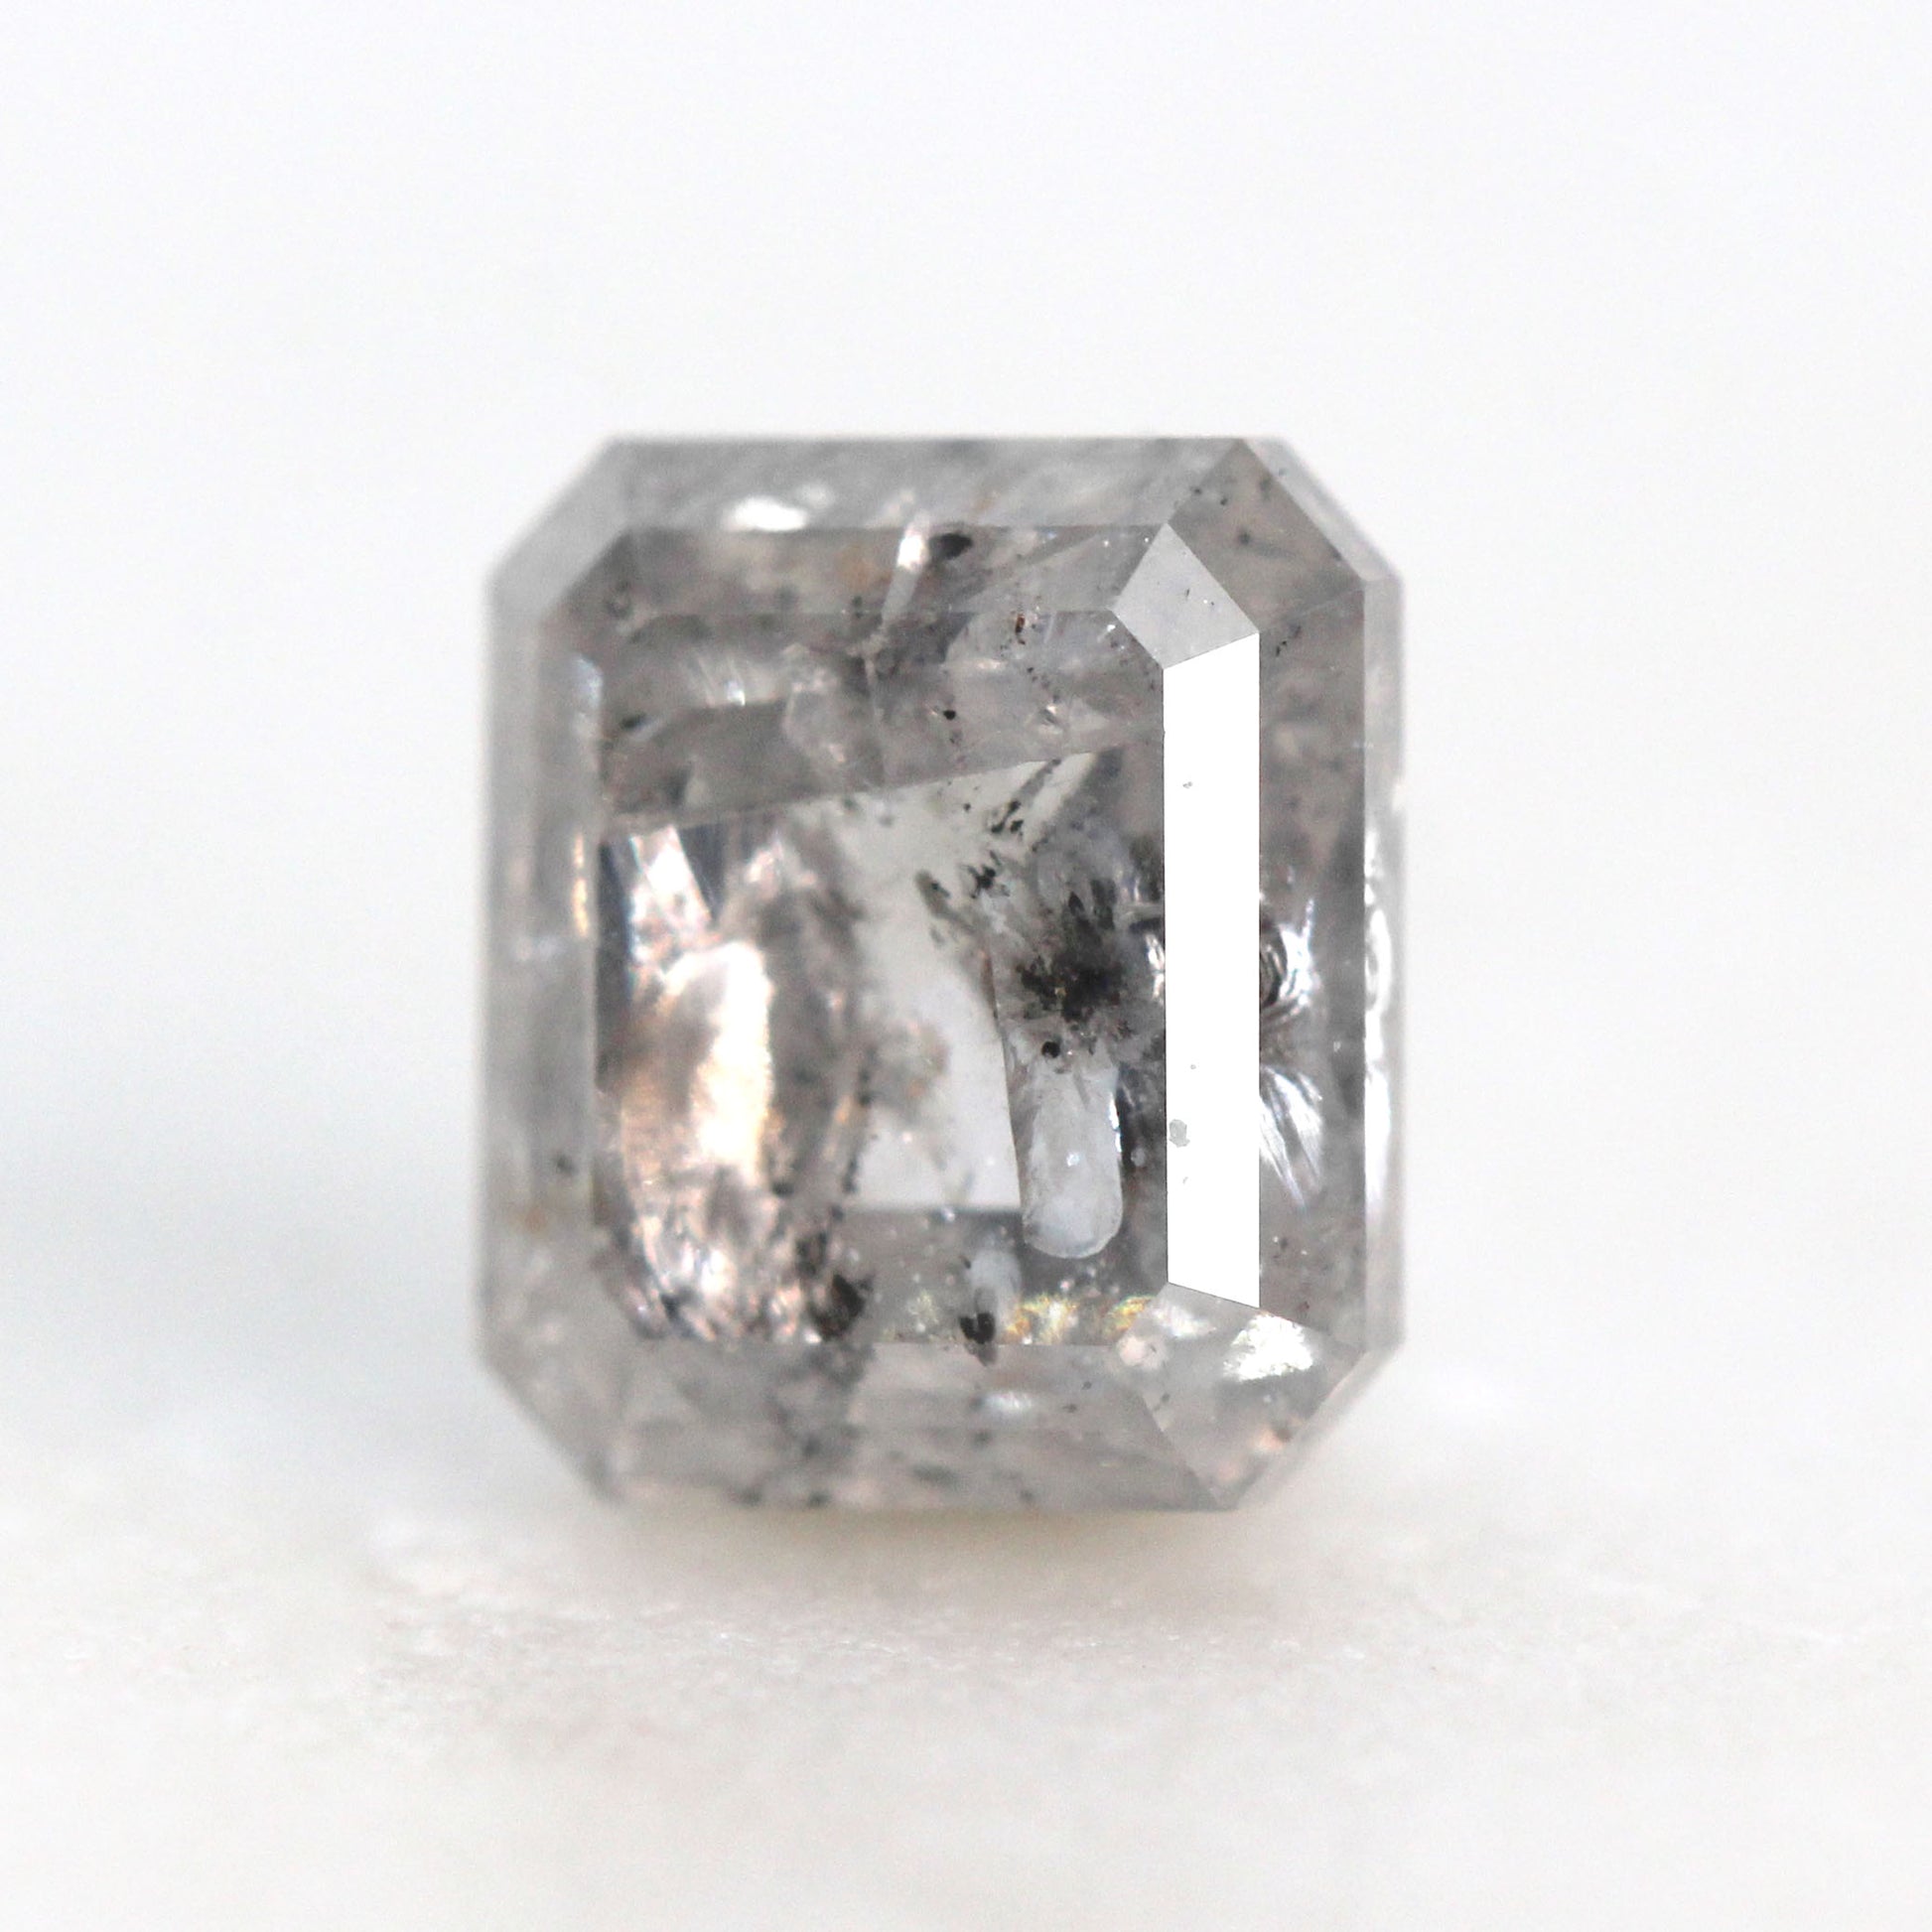 1.45 Carat Emerald Cut Stormy Gray Celestial Diamond for Custom Work - Inventory Code SGE145 - Midwinter Co. Alternative Bridal Rings and Modern Fine Jewelry